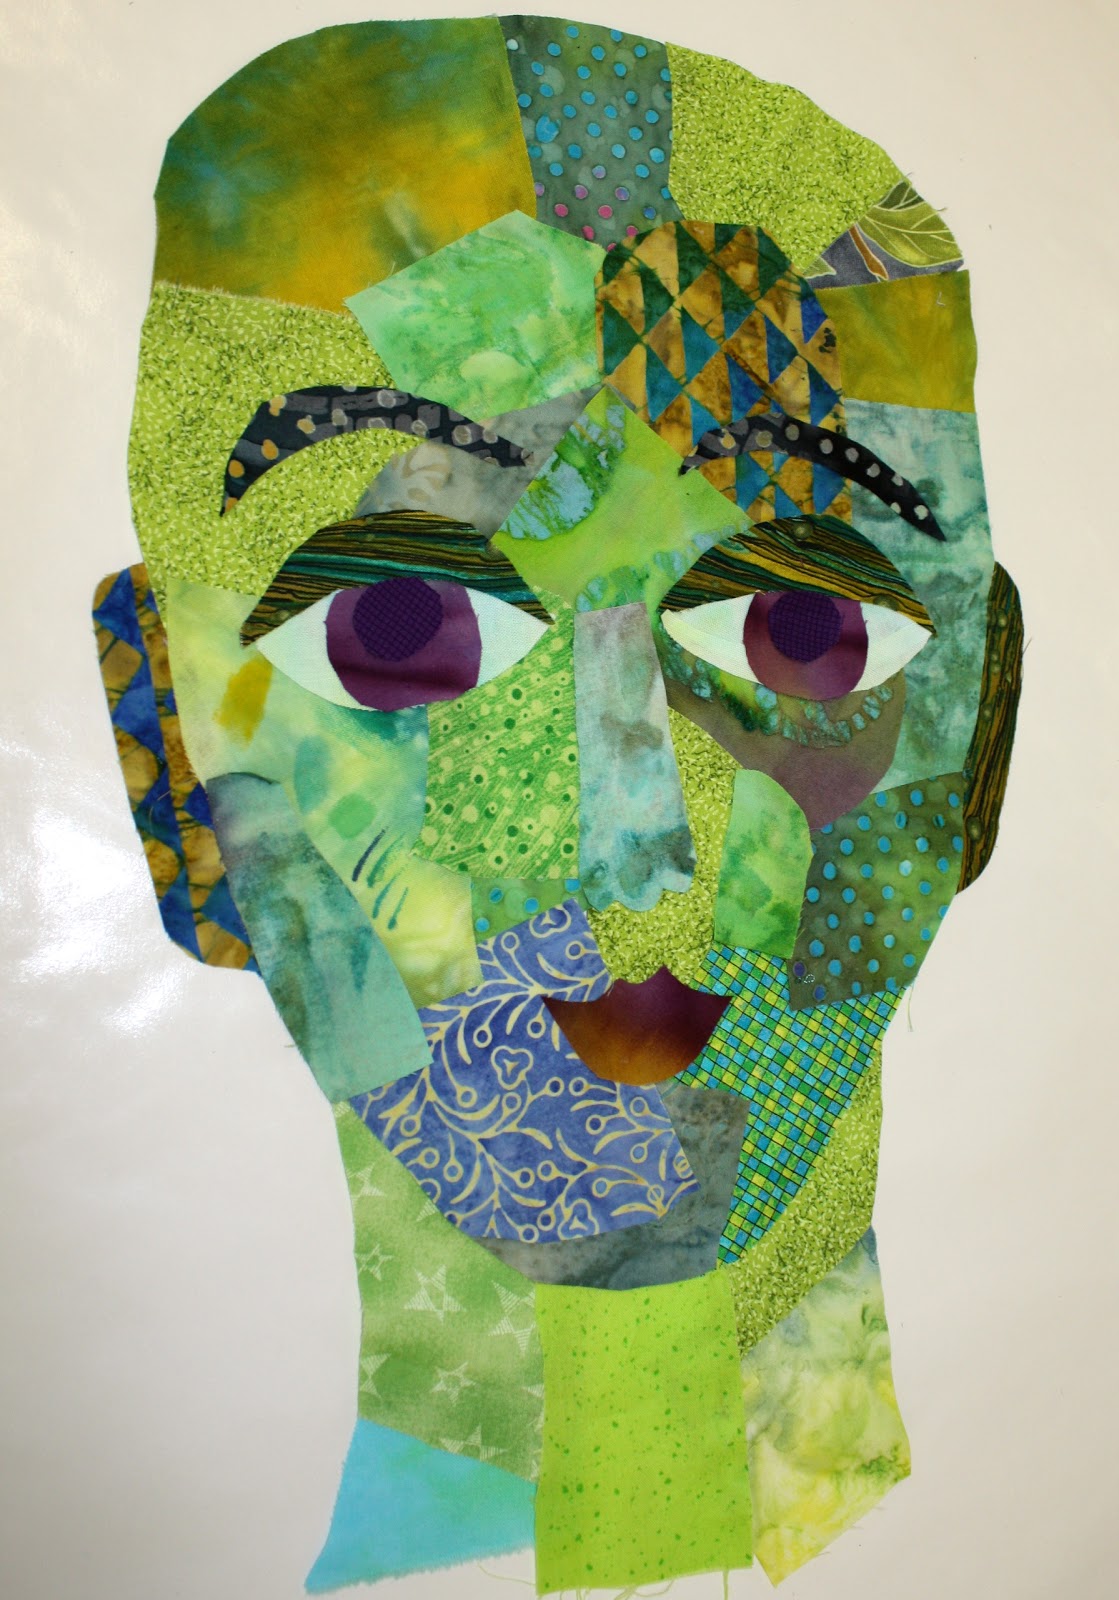 Too Wild Quilters: Collage Face - Just a Start